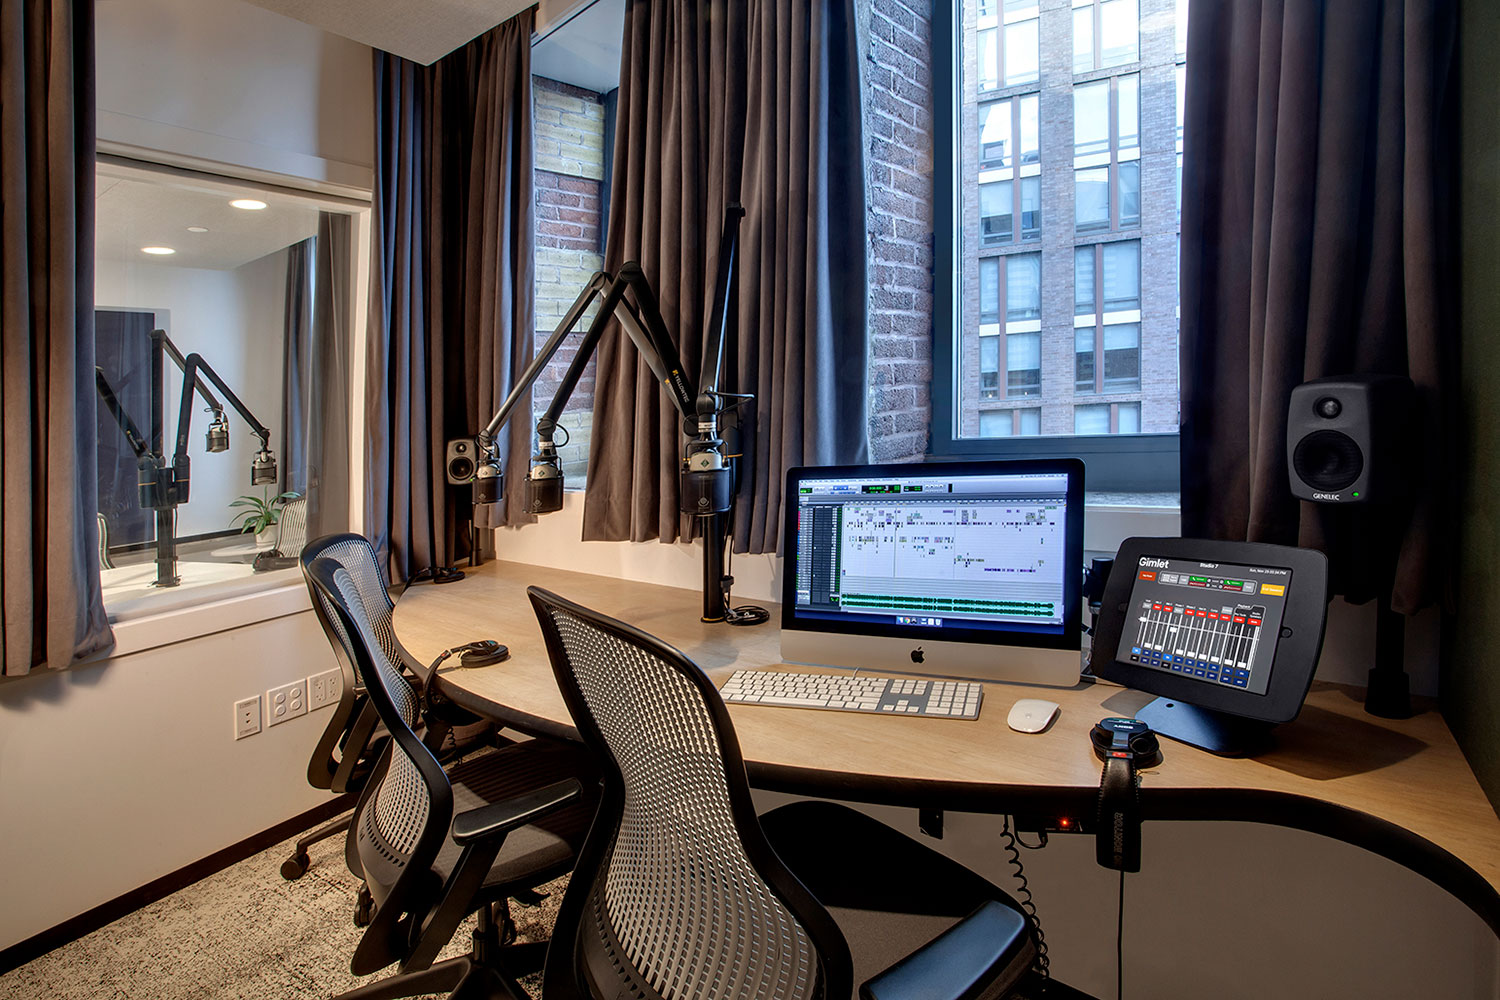 Gimlet Media, the award winning podcast production company is setting the standard in podcast creation studios with its new 28,000 square foot production facility. Designed by the acoustic architectural firm WSDG, it catapults Gimlet’s podcasting operations from a modest studio operation to a commercial-grade. Studio 7.